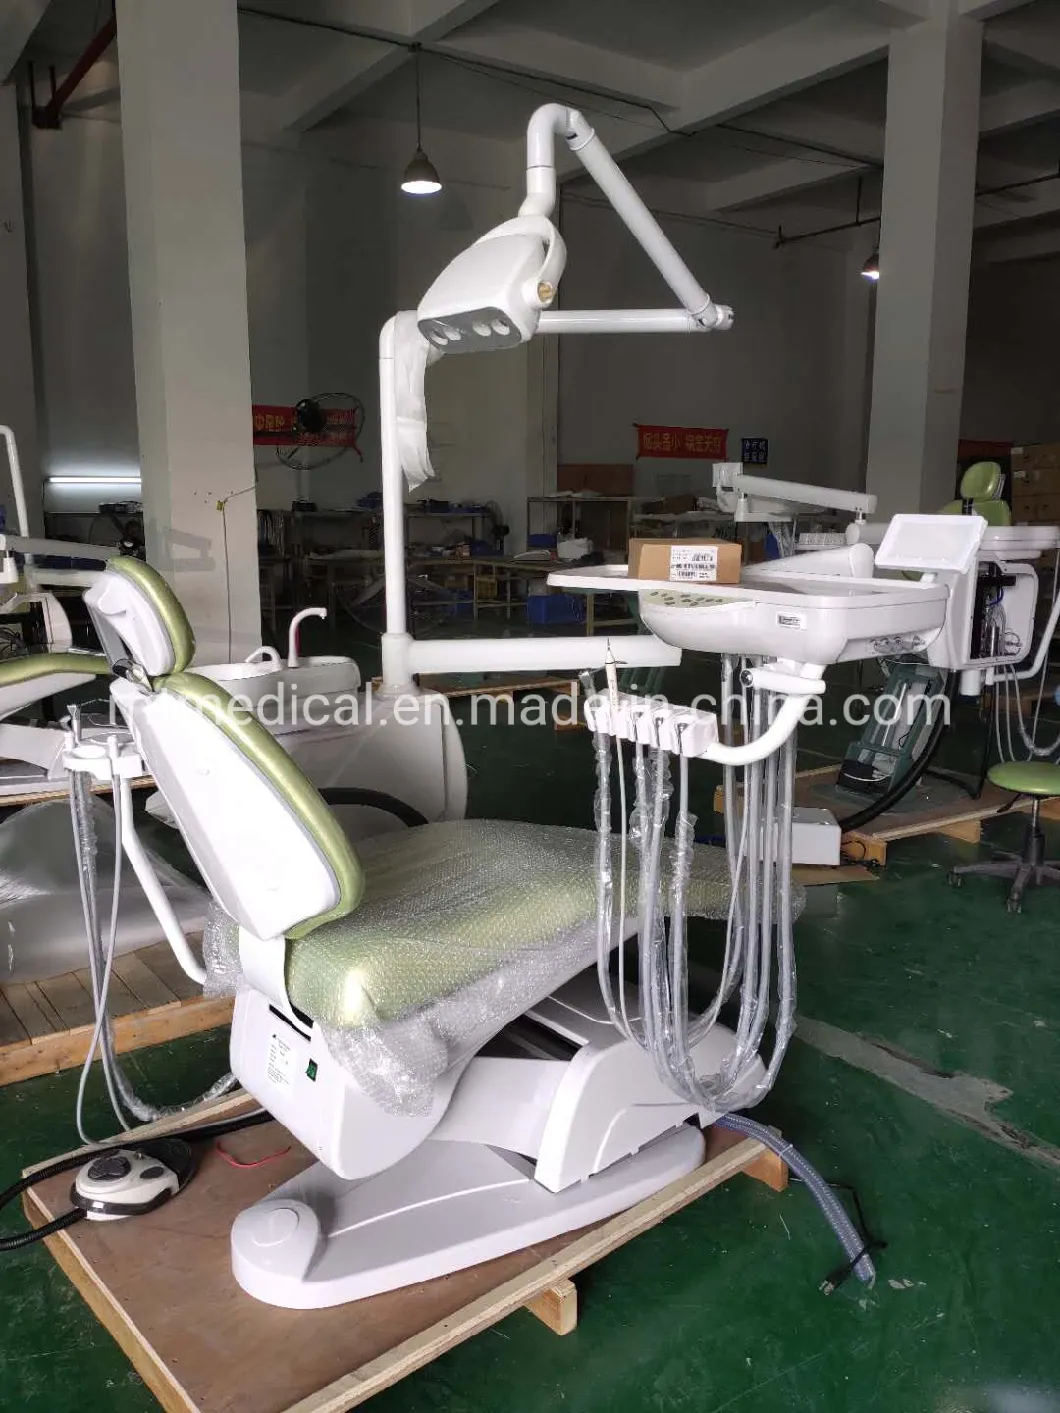 a Comfortable and Good Price Dental Unit and Dental Chair with LED Lamp or Halogen Lmp